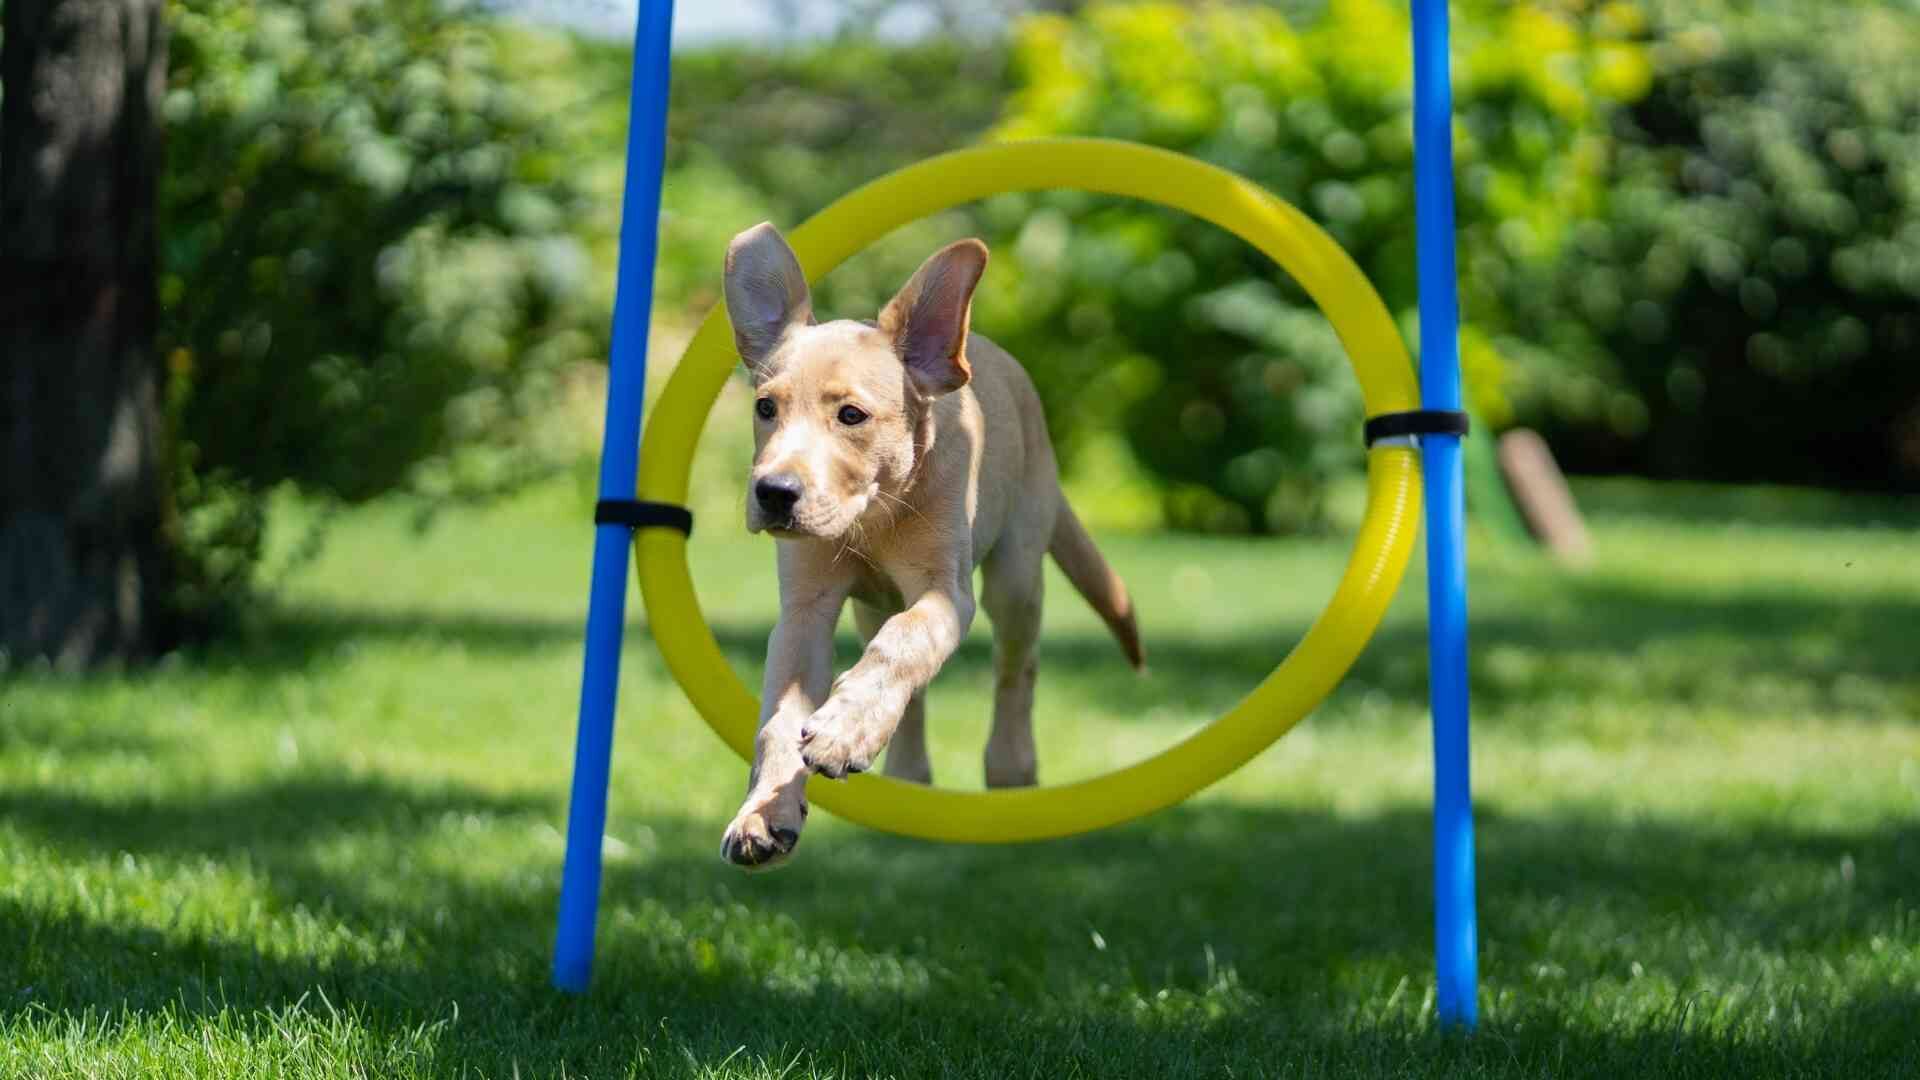 My Puppy Never Jumped: Reasons with Guide to Train for Jump